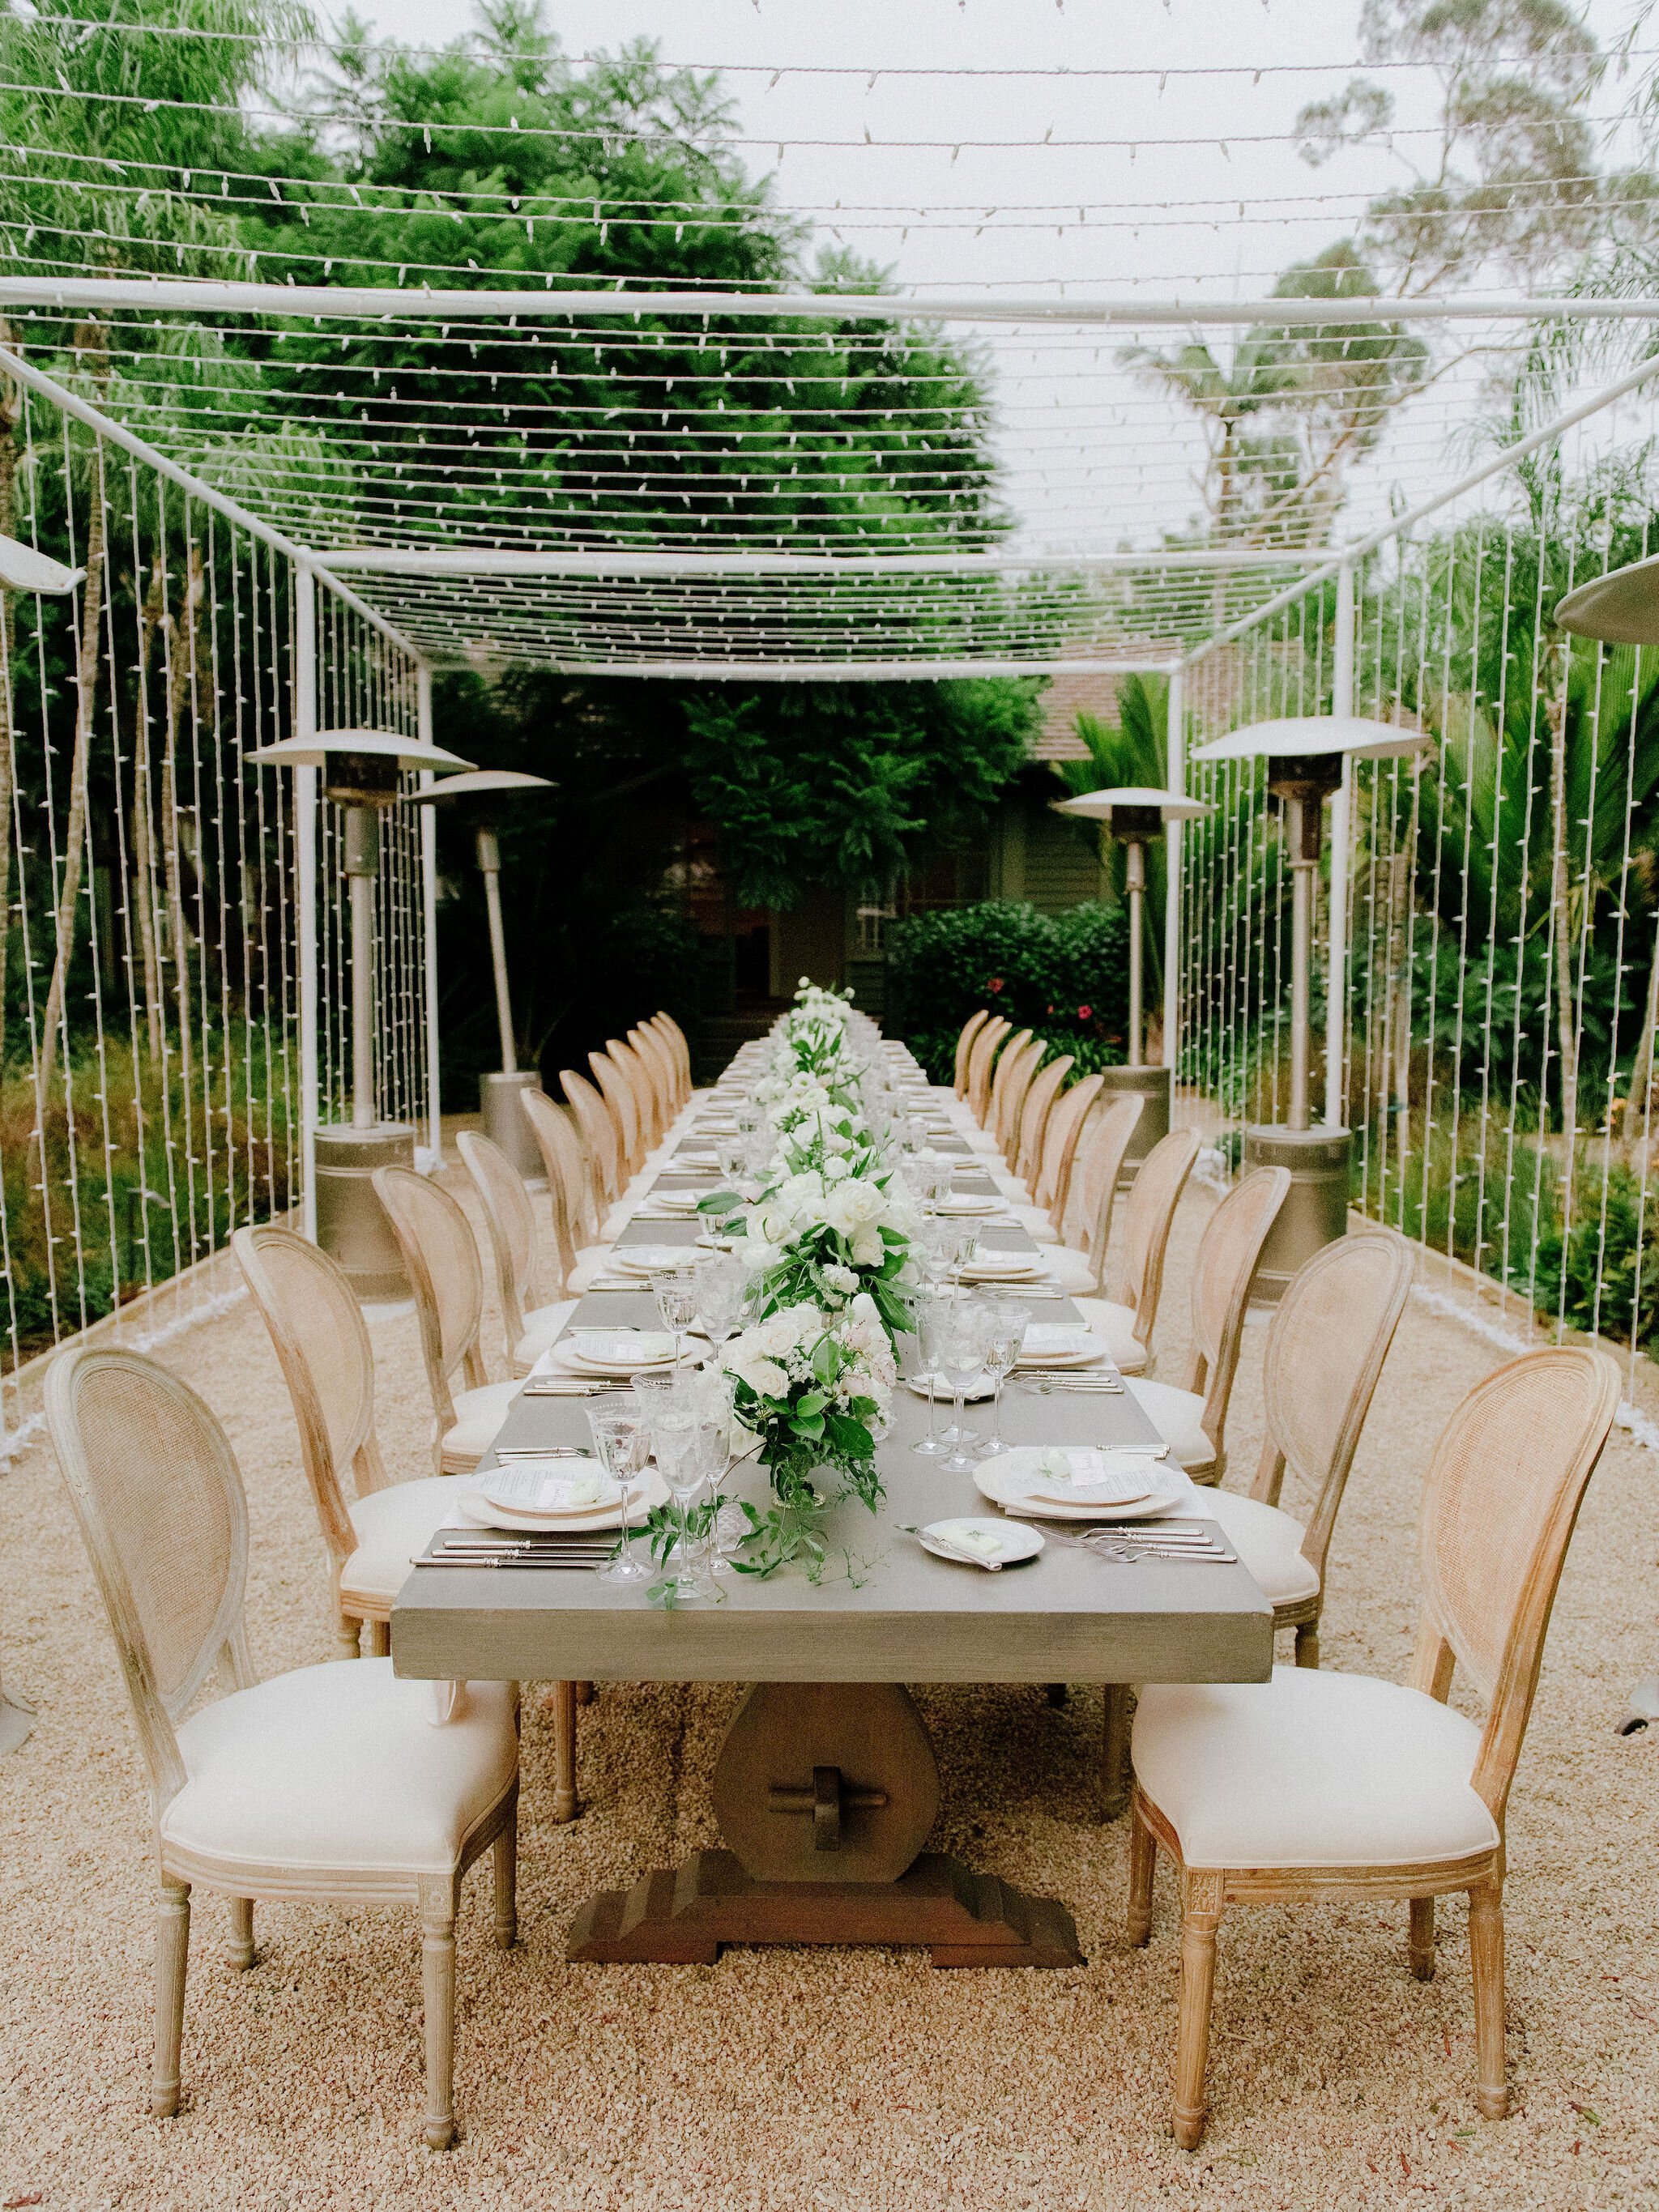 www.santabarbaraweddings.com | Chris J. Evans | Private Residence | Ashley Chanel Events | Rogue &amp; Fox | Reception Table Covered by String Lights